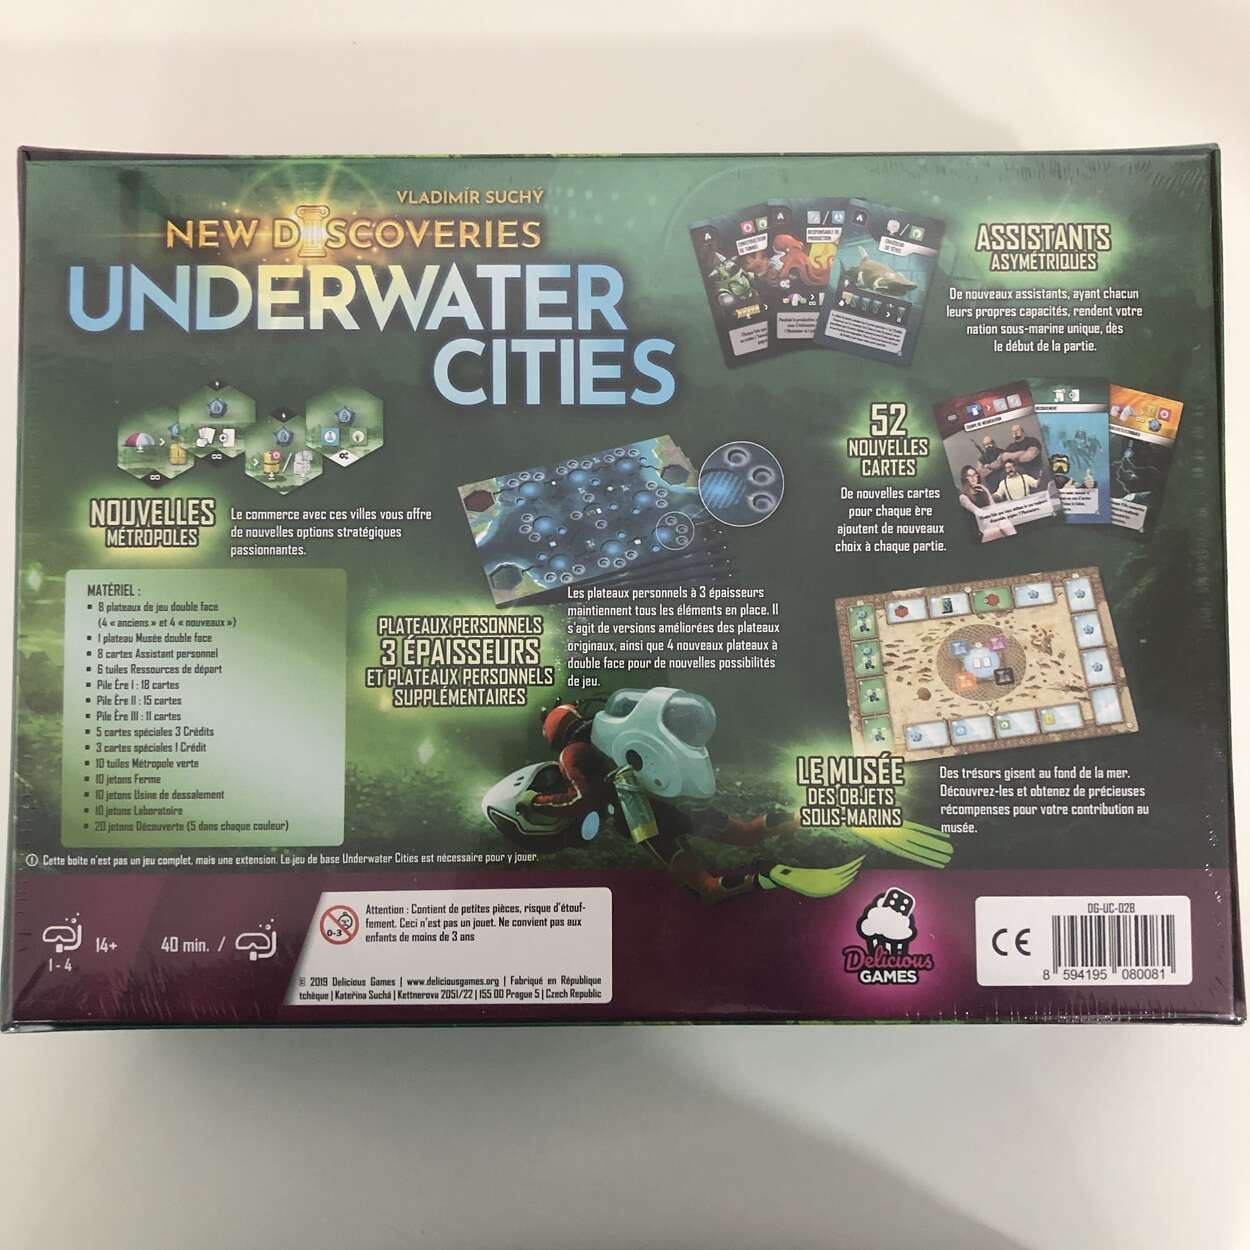 Underwater cities New discoveries